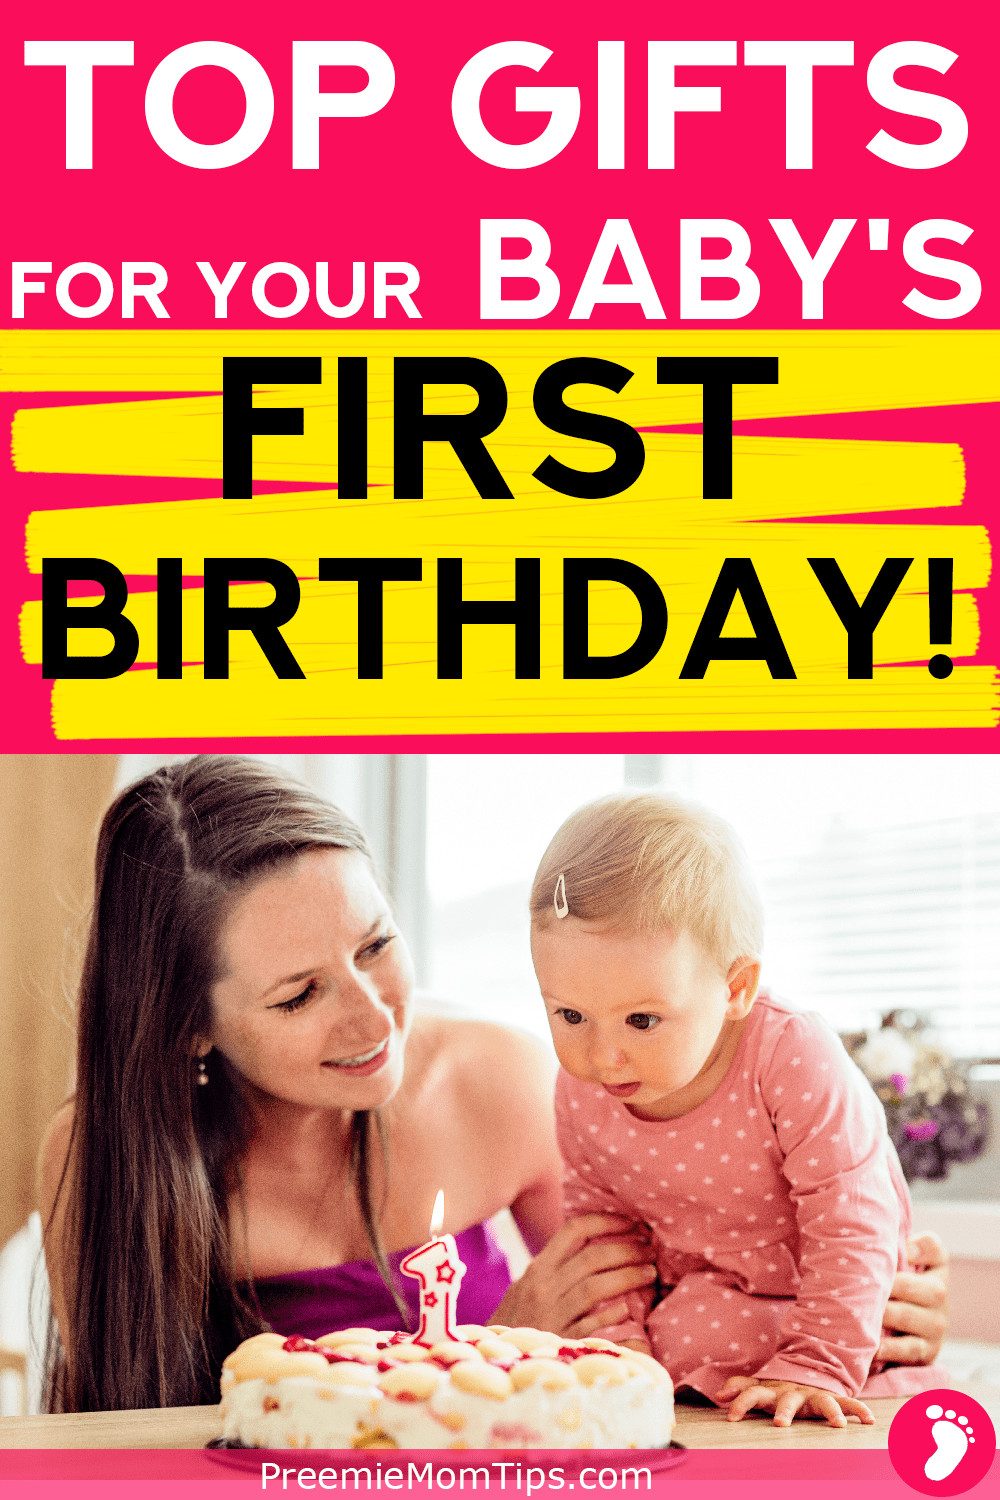 First Birthday Gift Ideas From Parents
 Affordable First Birthday Gift Ideas Toys your Baby will